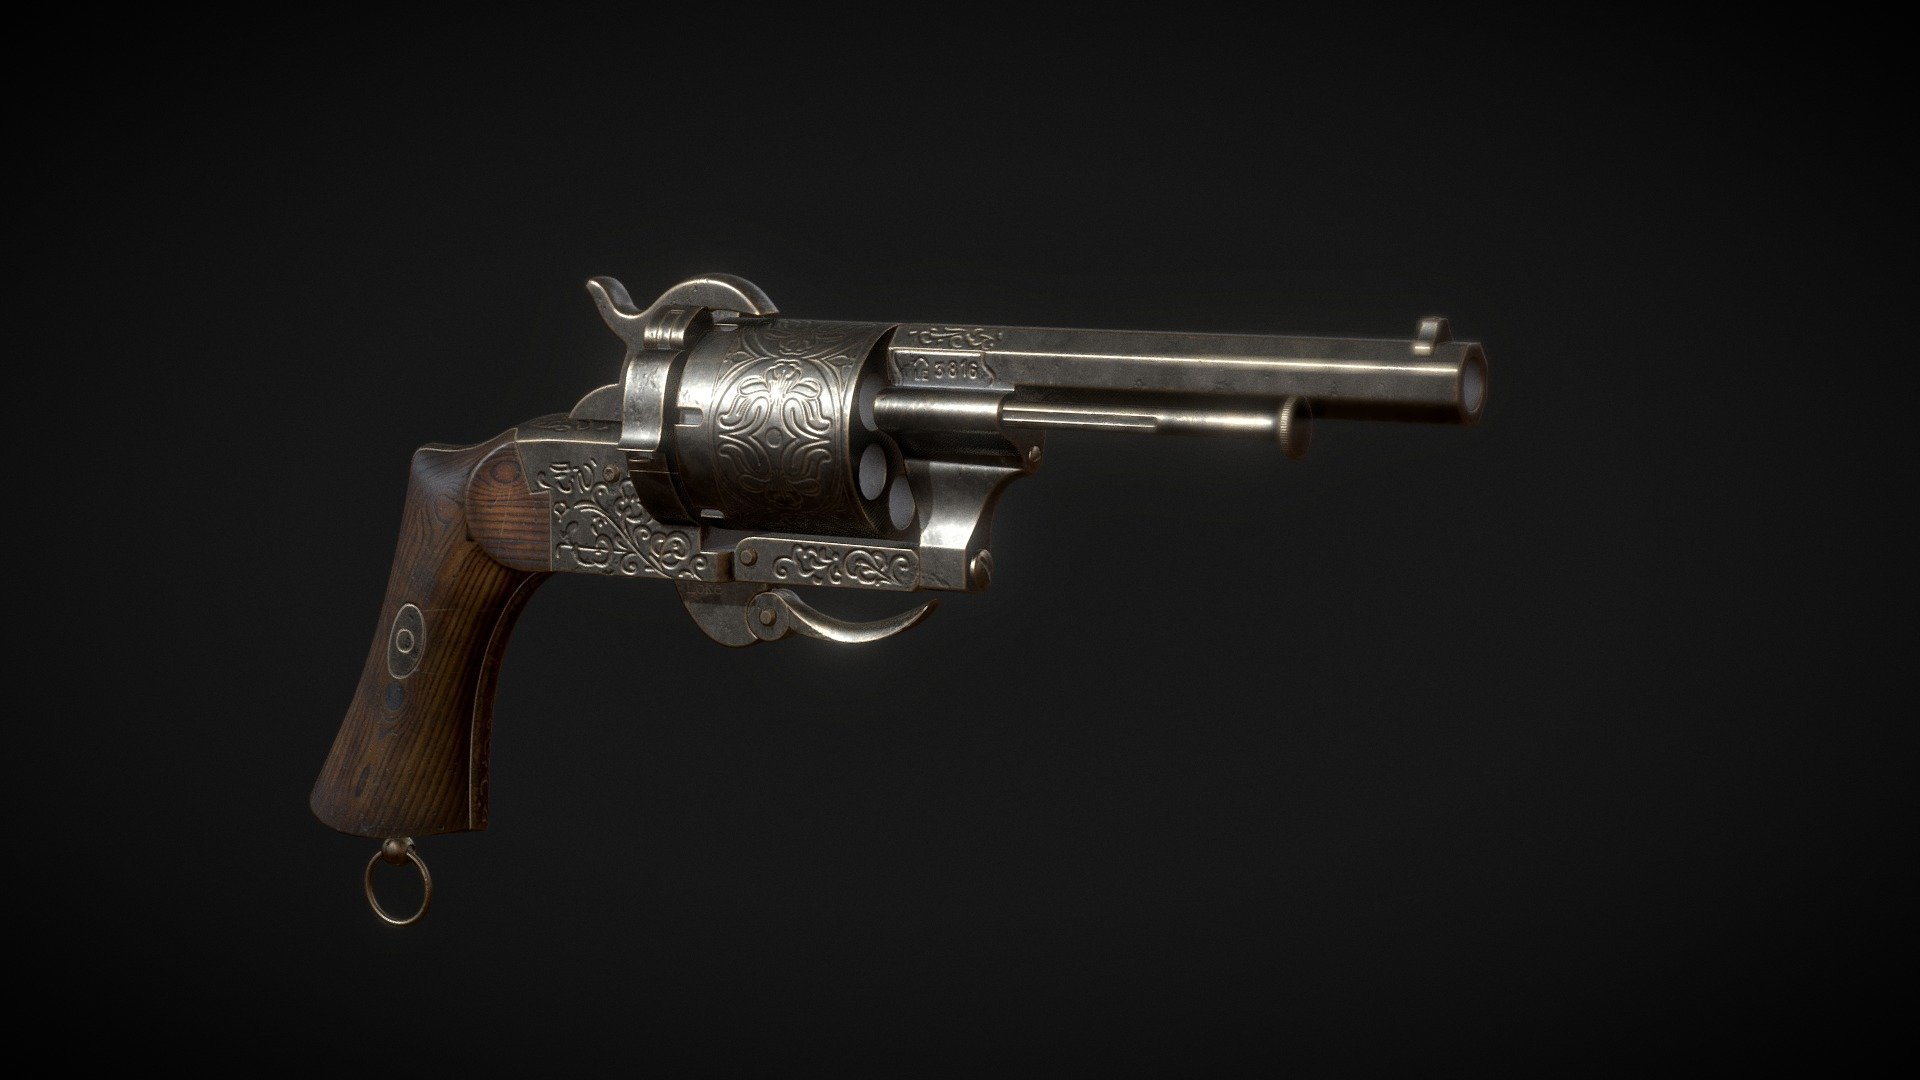 Ornamental Lefaucheux based on https://www.antiquepistols.co/project/le-forshew-pocket-7mm/.
Modeled in 3Ds Max and textured in Substance Painter 3d model